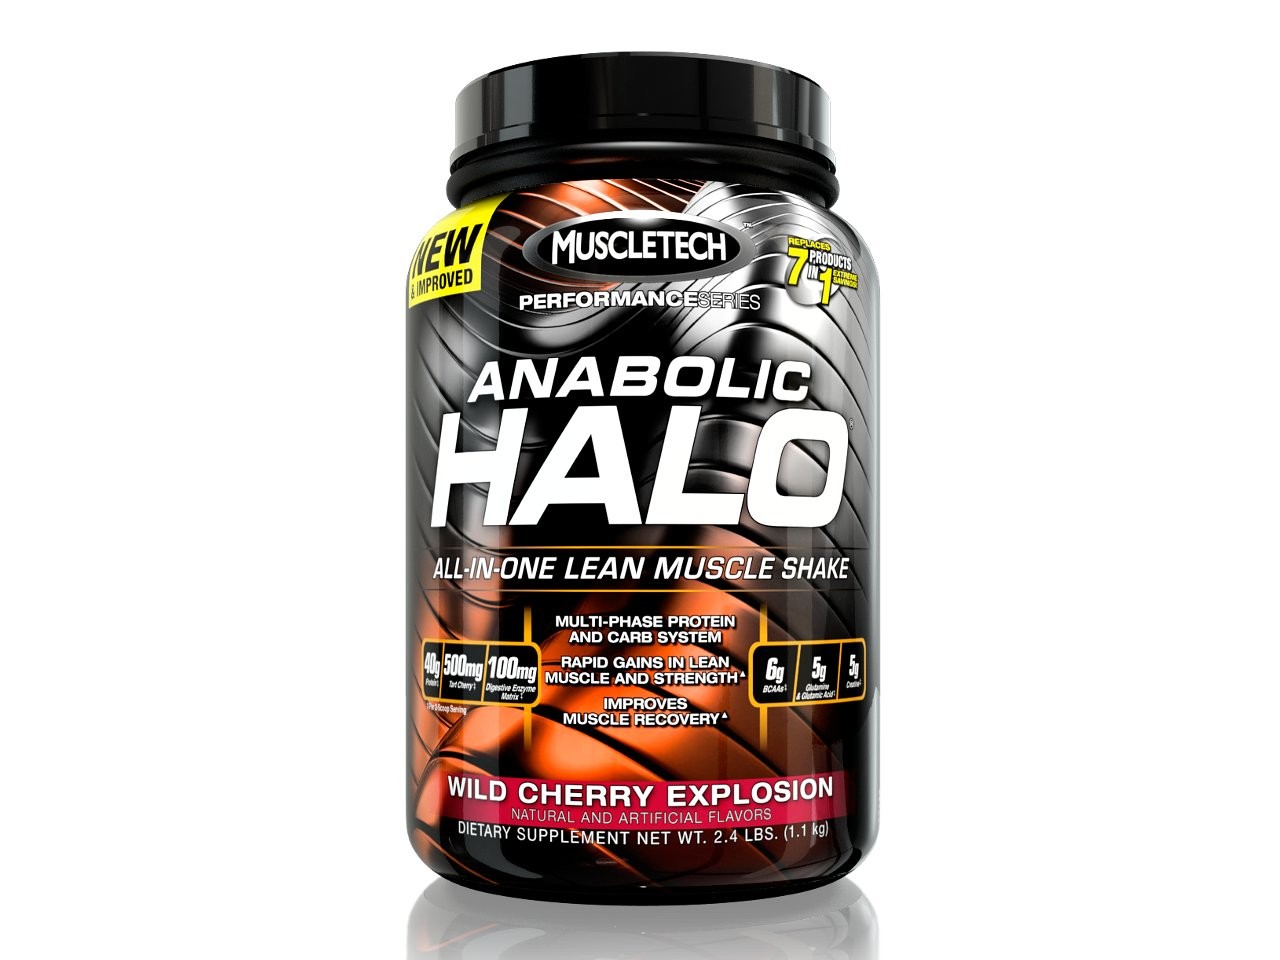 Muscletech Anabolic Halo Multi-Phase Carb System. 